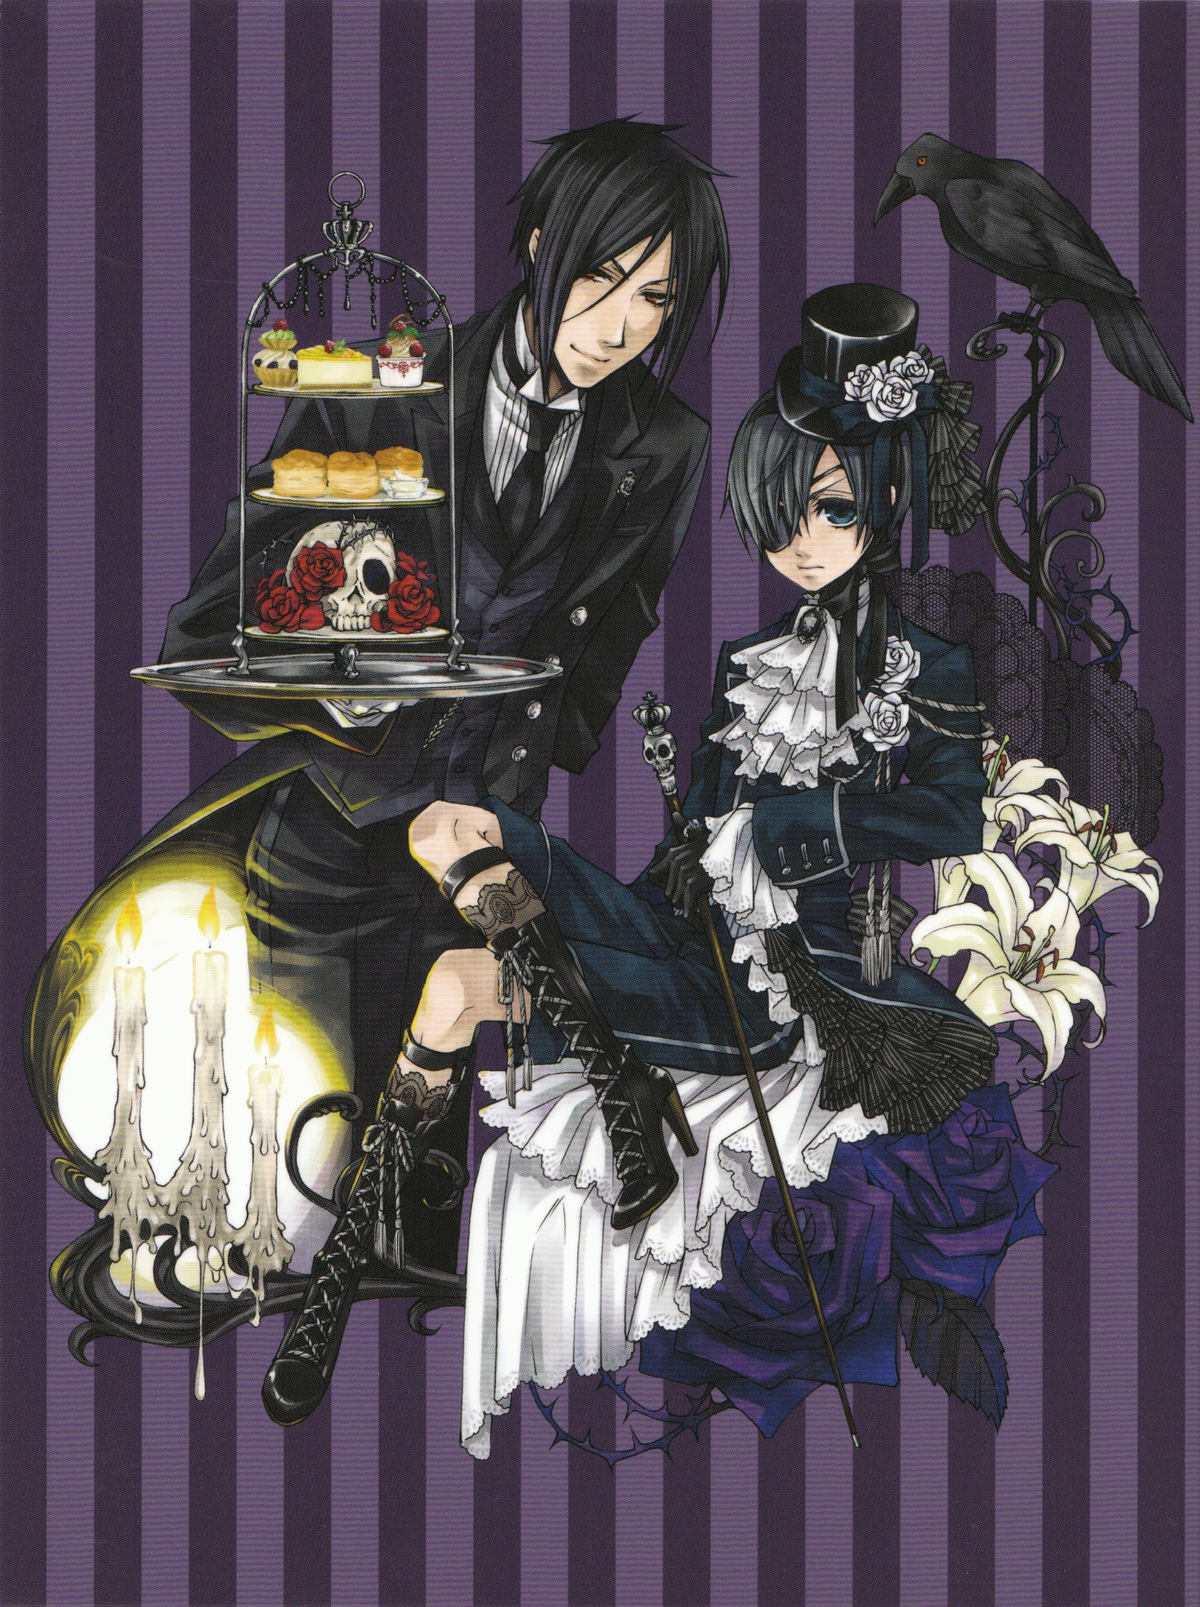 Black Butler: 5 Ways It's Different From The Manga (& 5 Ways It's The Same)